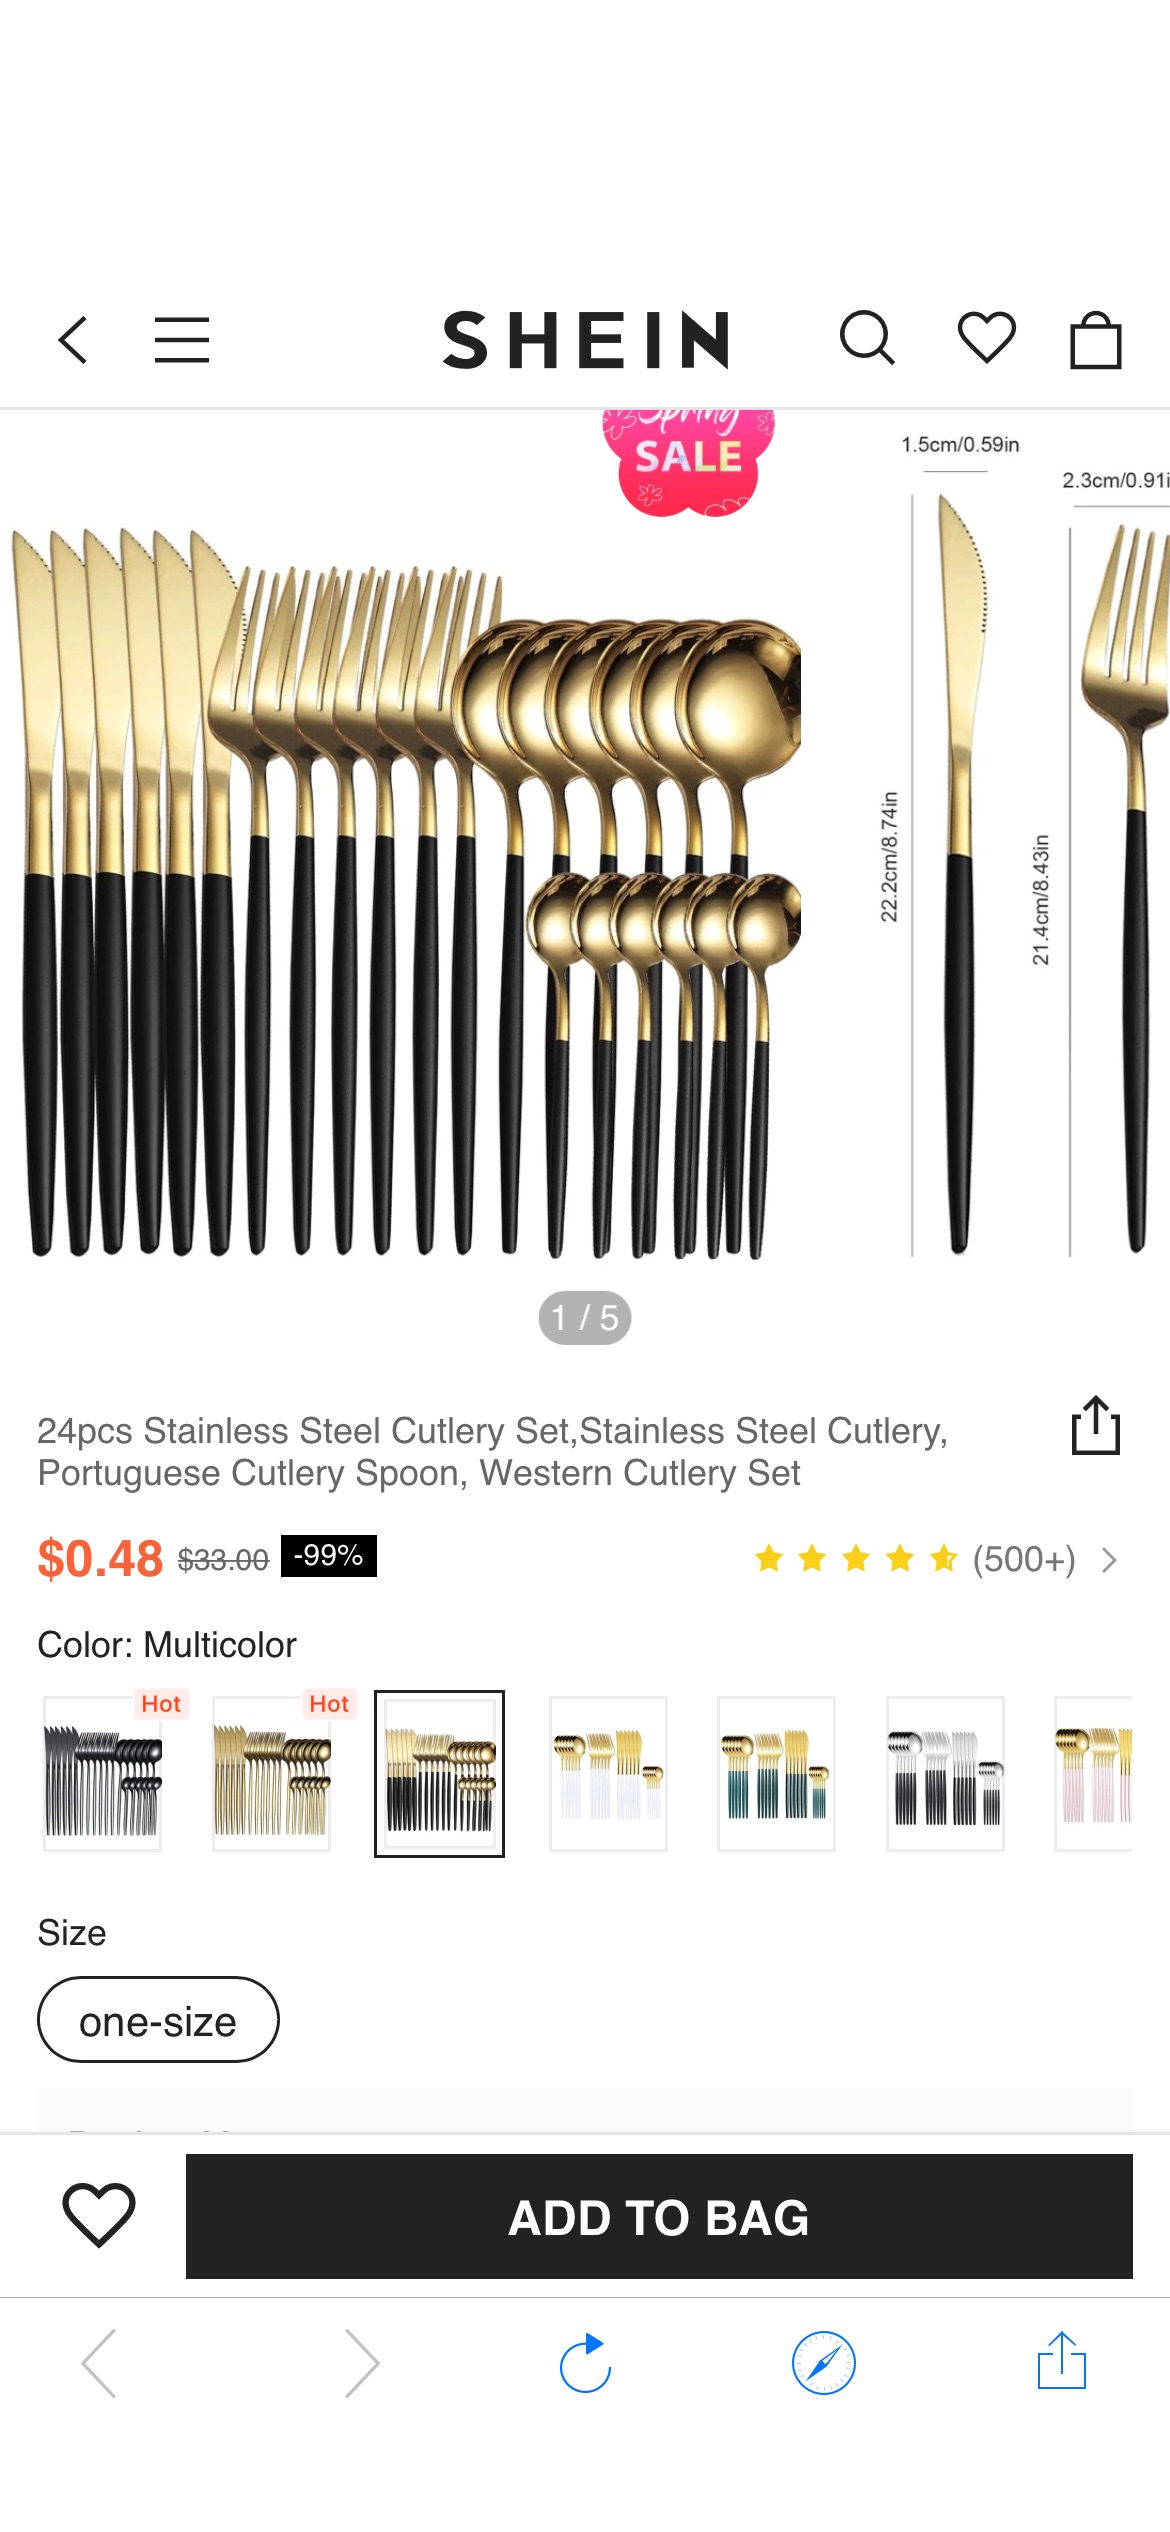 24pcs Stainless Steel Cutlery Set,Stainless Steel Cutlery, Portuguese Cutlery Spoon, Western Cutlery Set | SHEIN USA